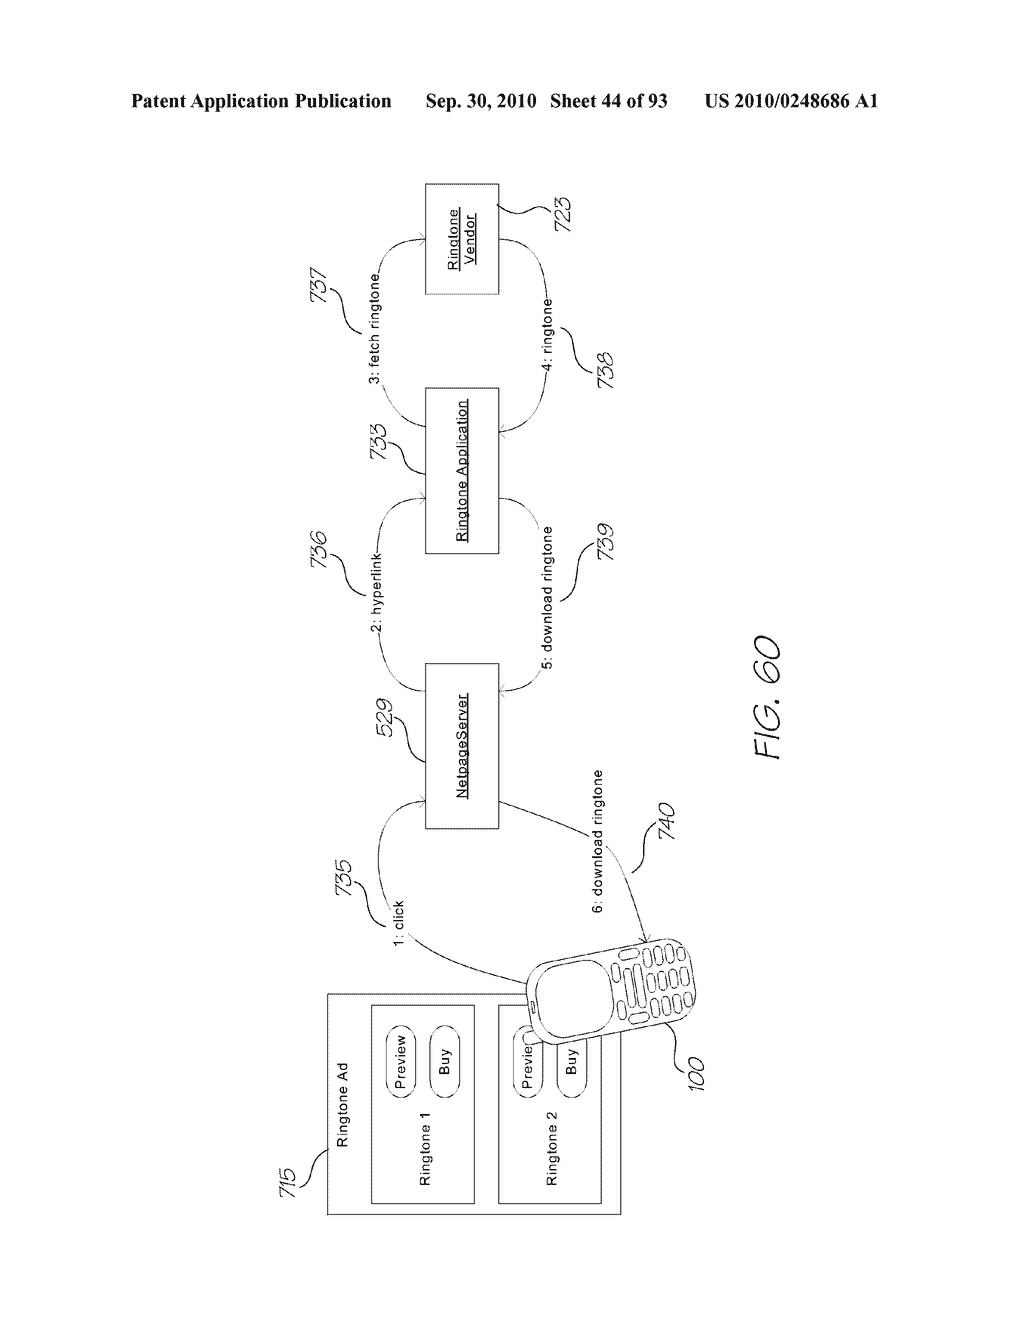 METHOD OF PRINTING AND RETRIEVING INFORMATION USING A MOBILE TELECOMMUNICATIONS DEVICE - diagram, schematic, and image 45